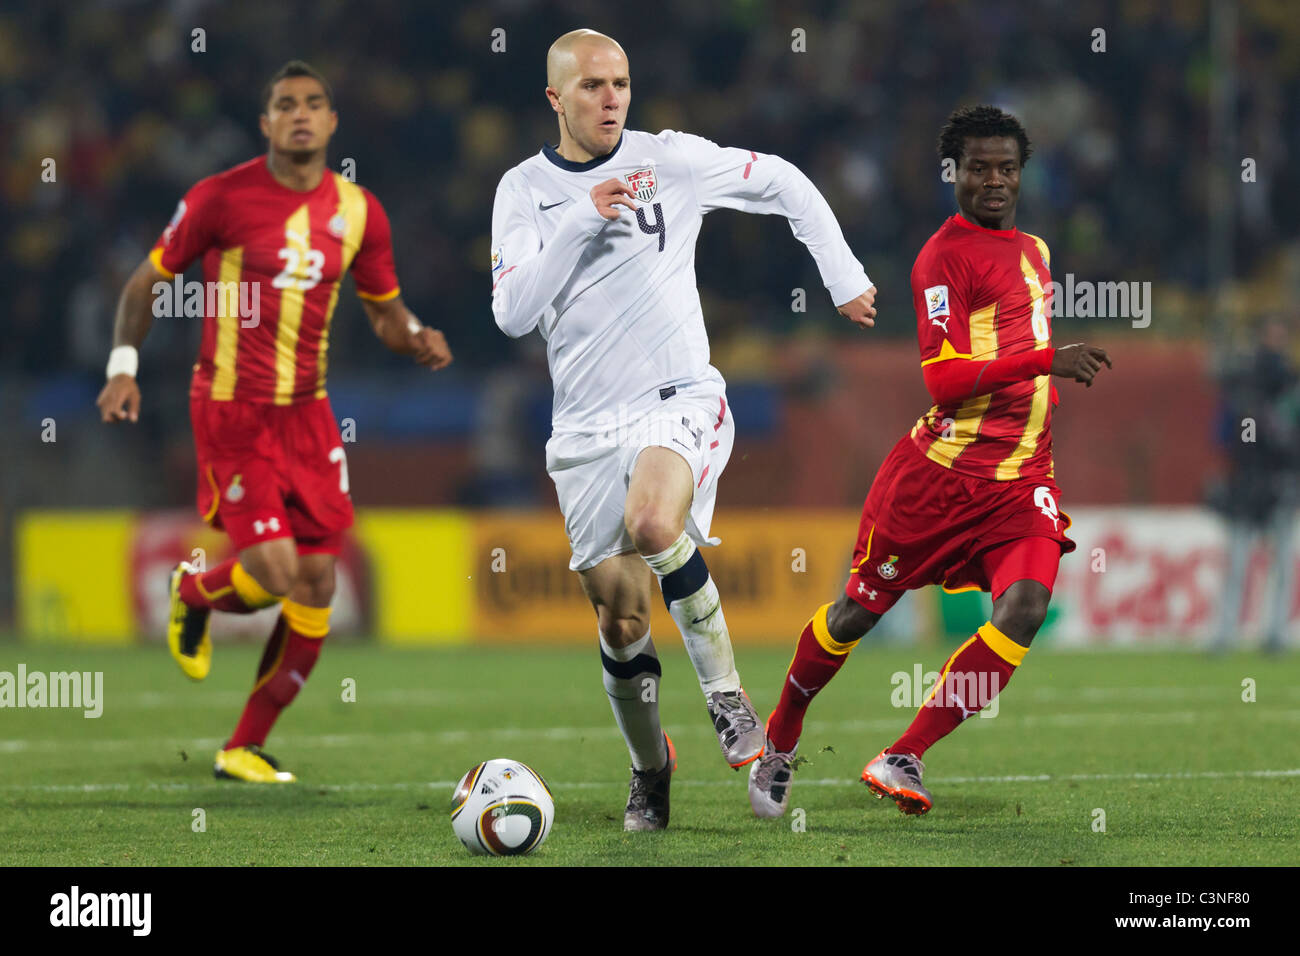 Michael Bradley of the United States drives the ball through the midfield during a 2010 World Cup soccer match against Ghana. Stock Photo